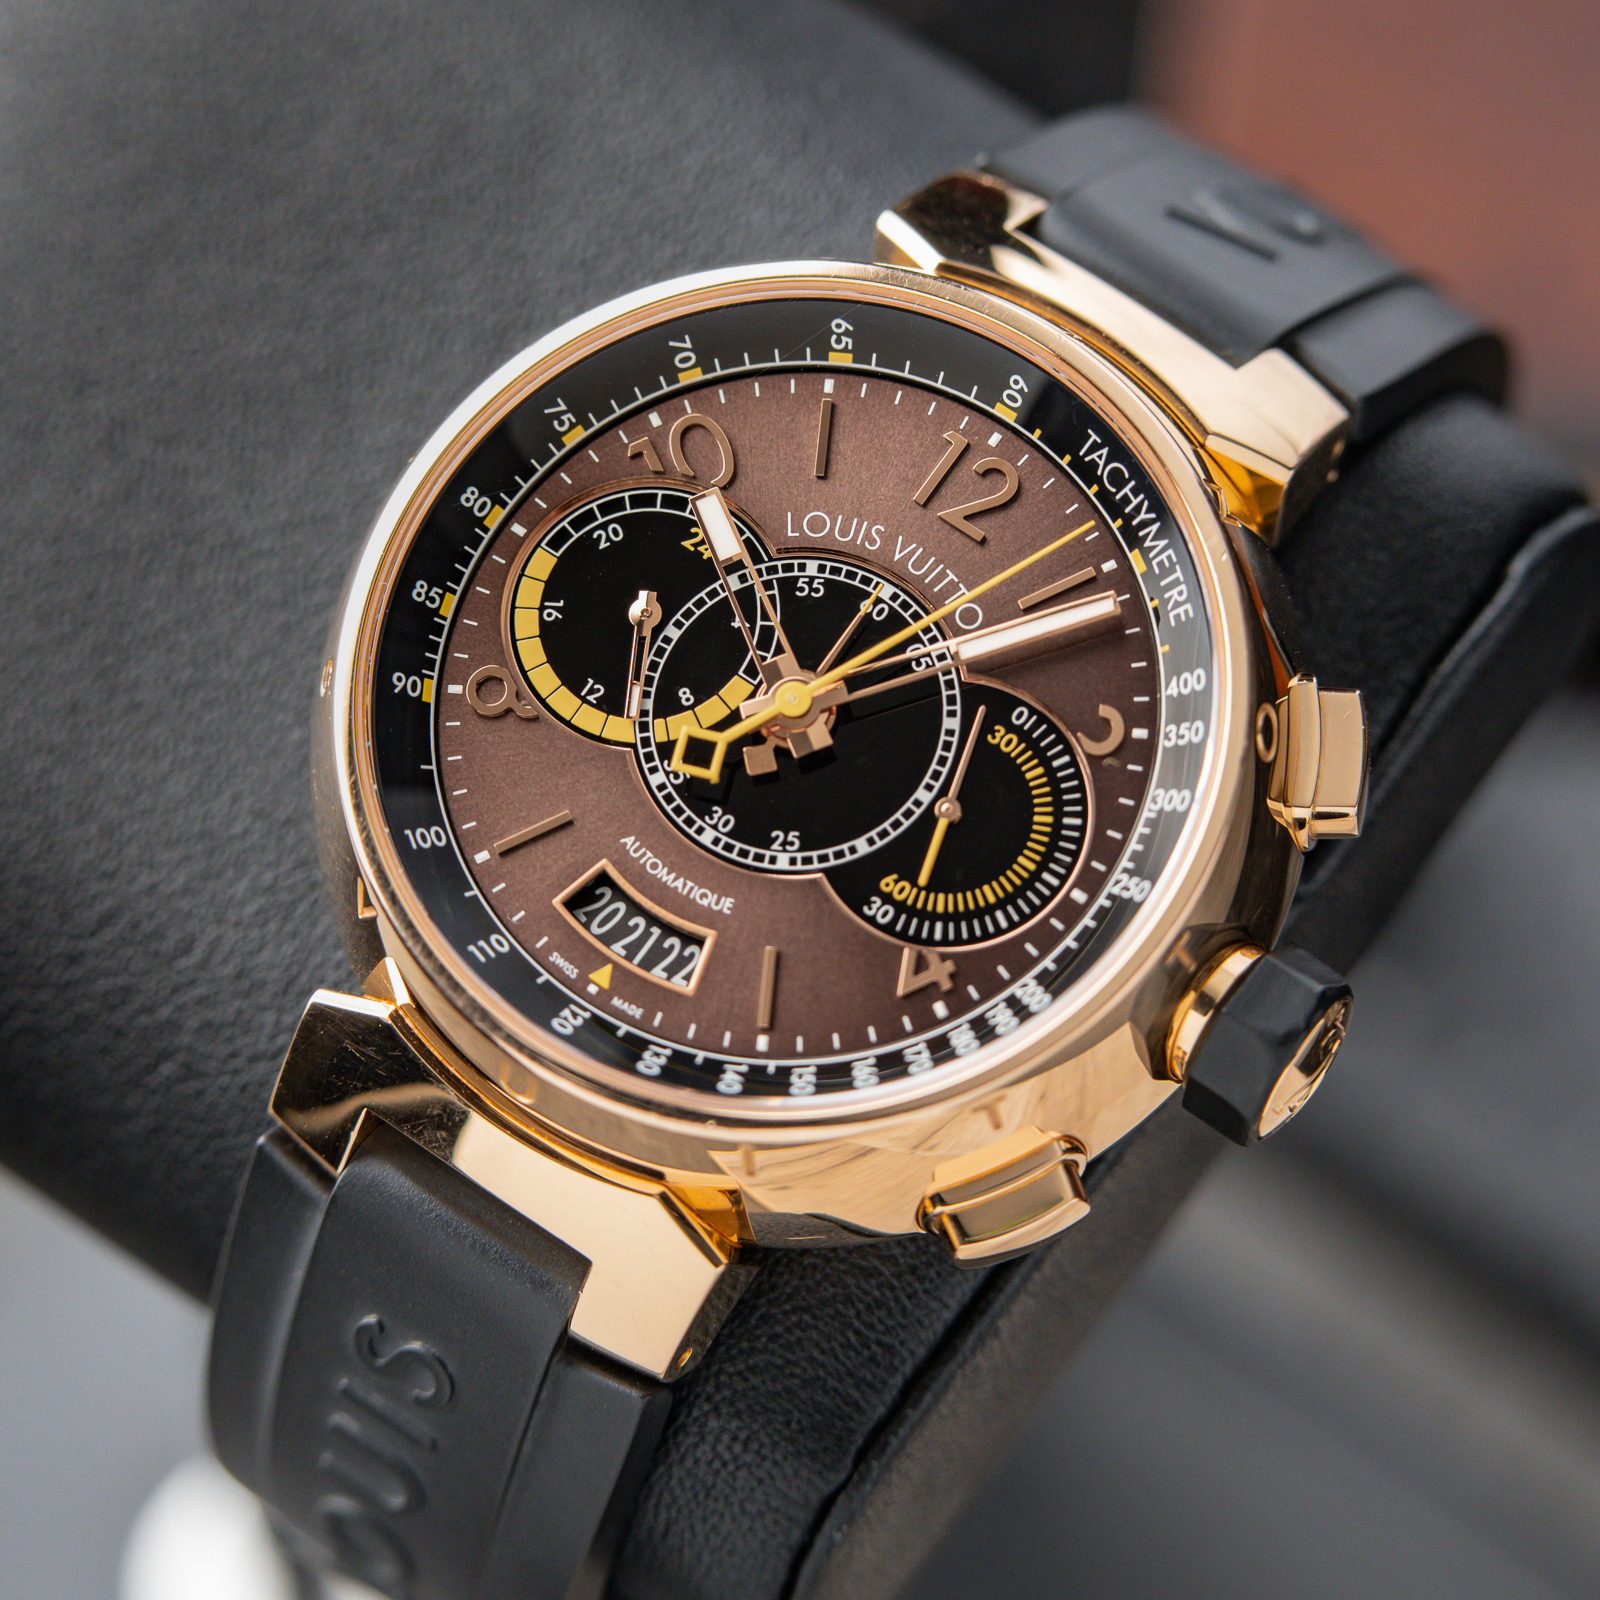 tambour automatic chronograph watch